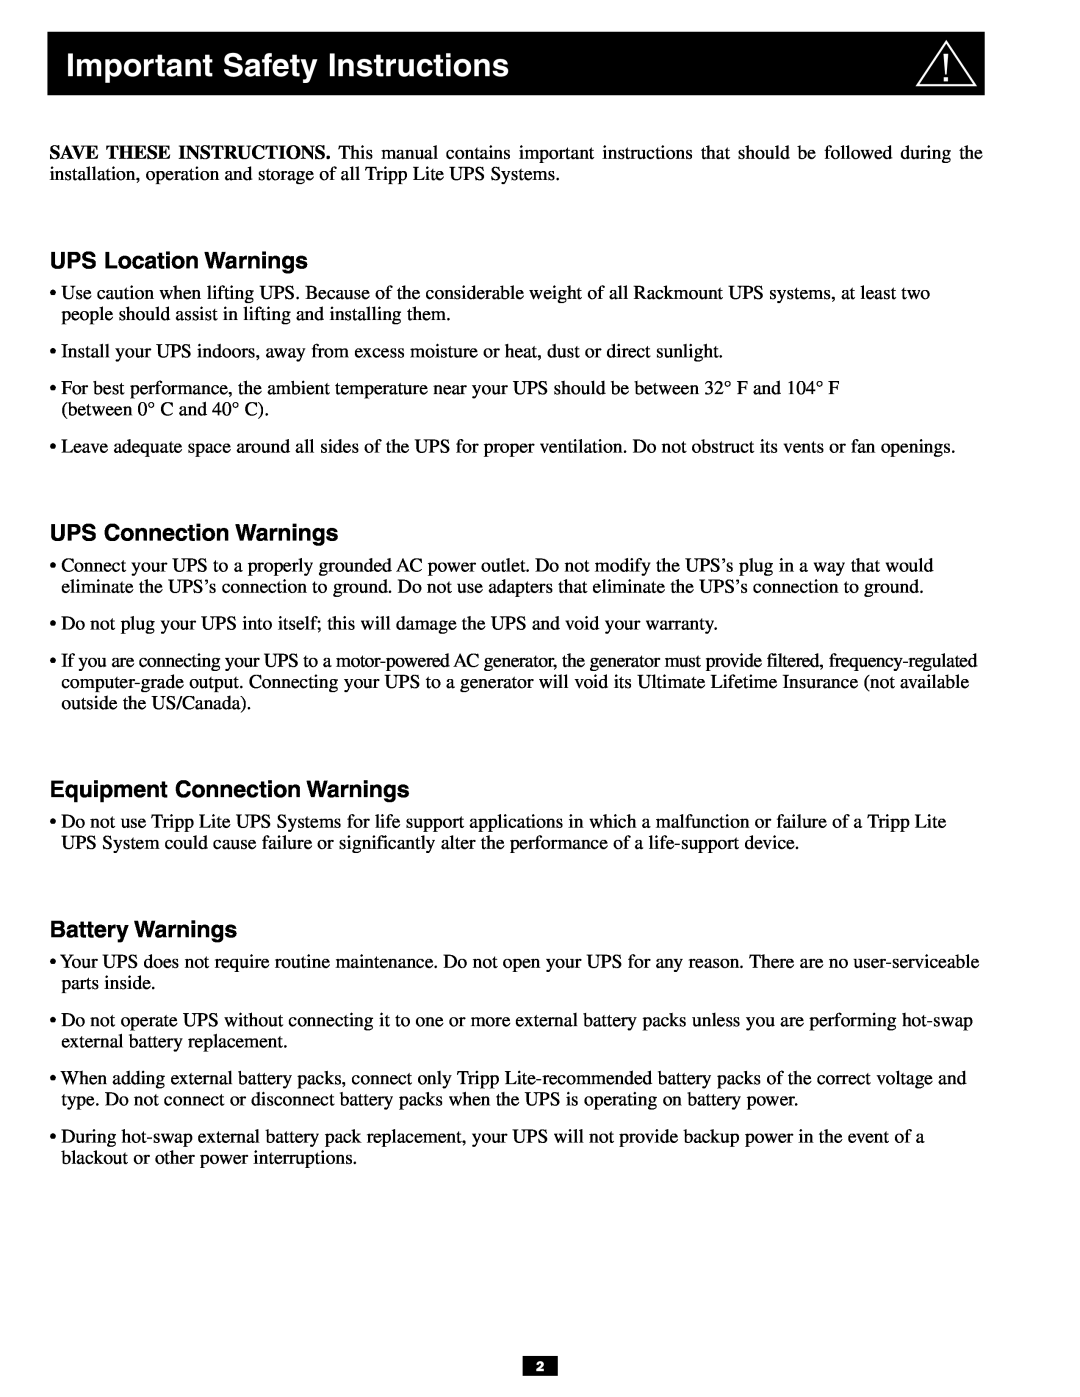 Tripp Lite 3U Important Safety Instructions, UPS Location Warnings, UPS Connection Warnings, Equipment Connection Warnings 